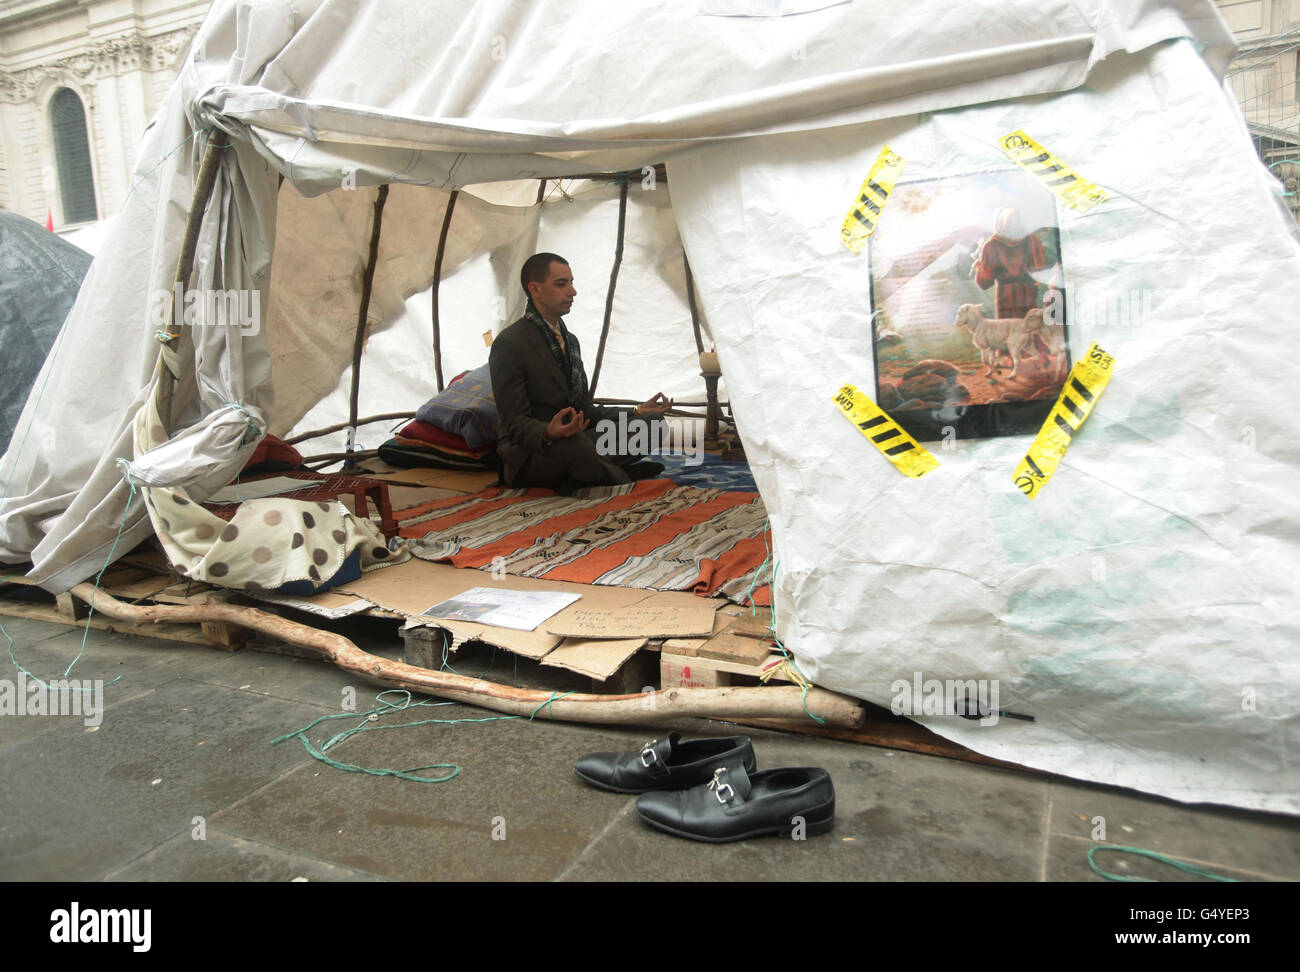 A man meditates inside a tent at the site of Occupy outside St Paul's Cathedral in the City of London. The legal steps taken to evict the anti-capitalist protesters were more 'extreme and draconian' than necessary, the Court of Appeal heard today. Stock Photo